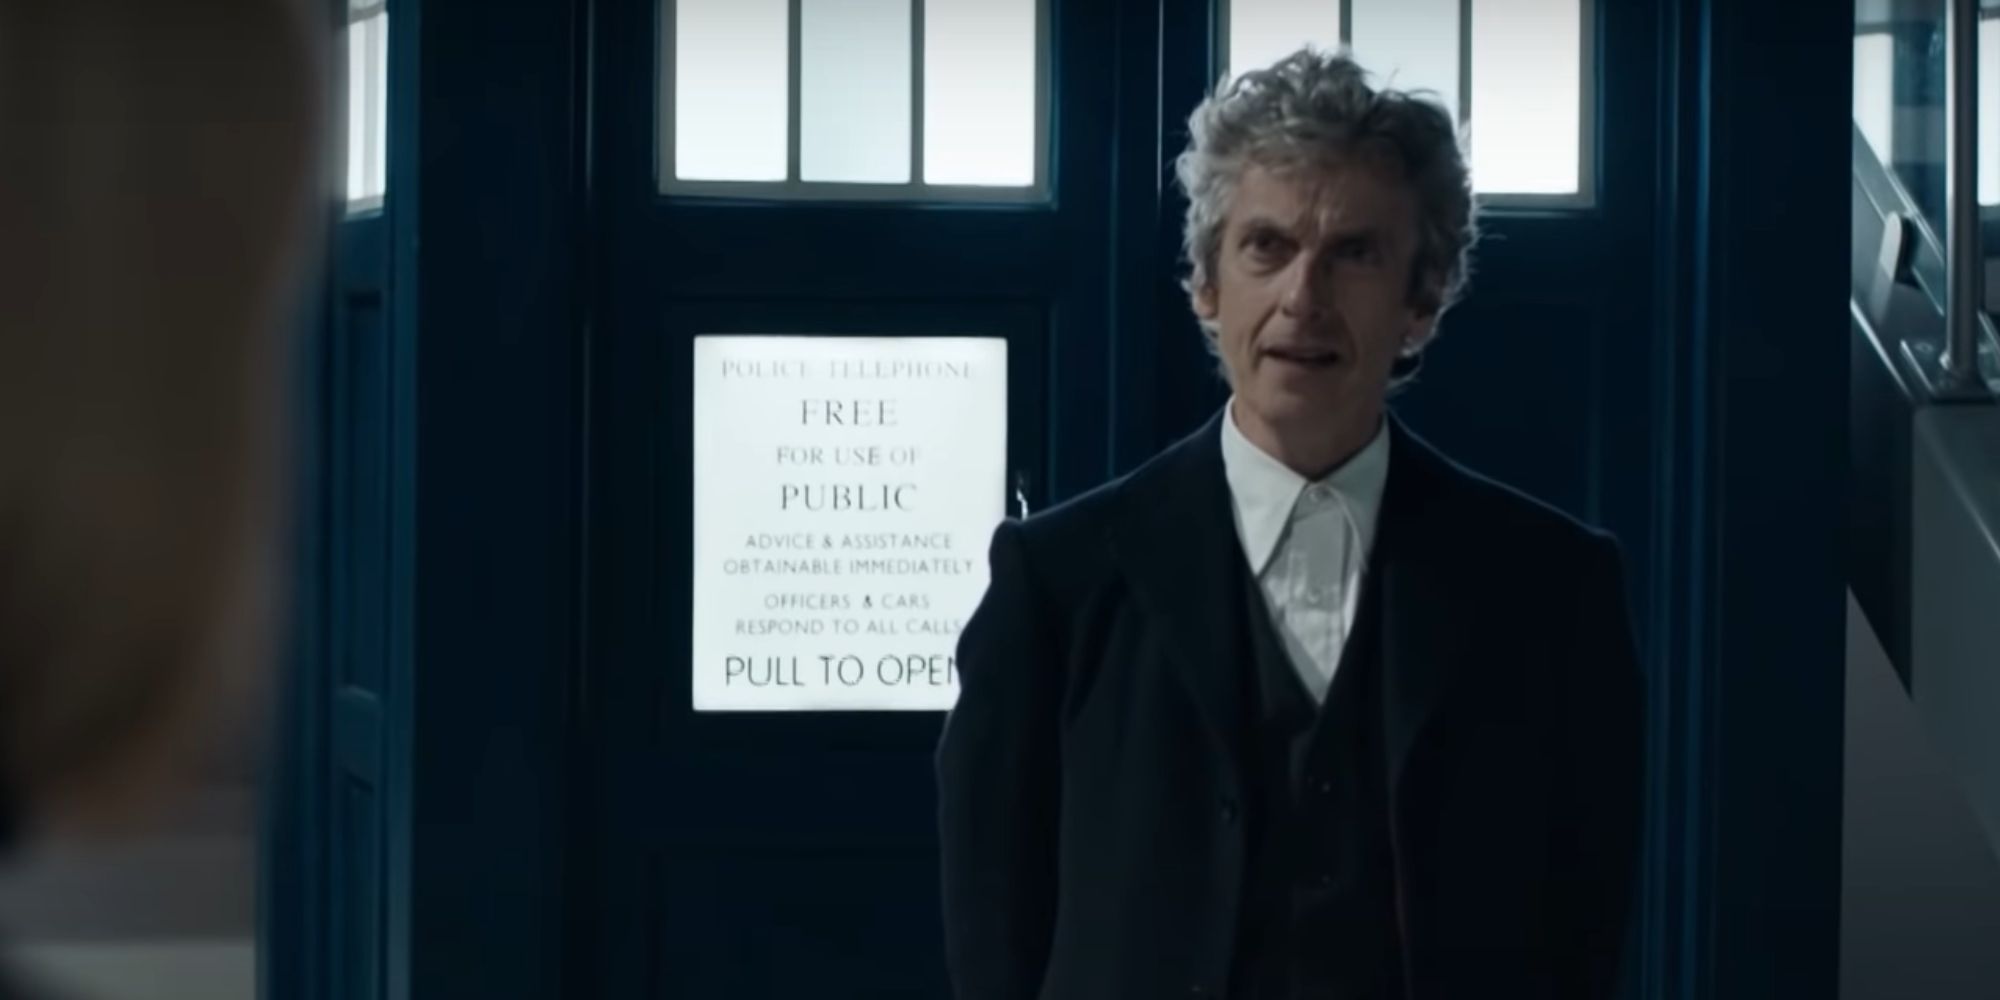 Peter Capaldi as the Twelfth Doctor in the Doctor Who spinoff Class, standing in front of his TARDIS